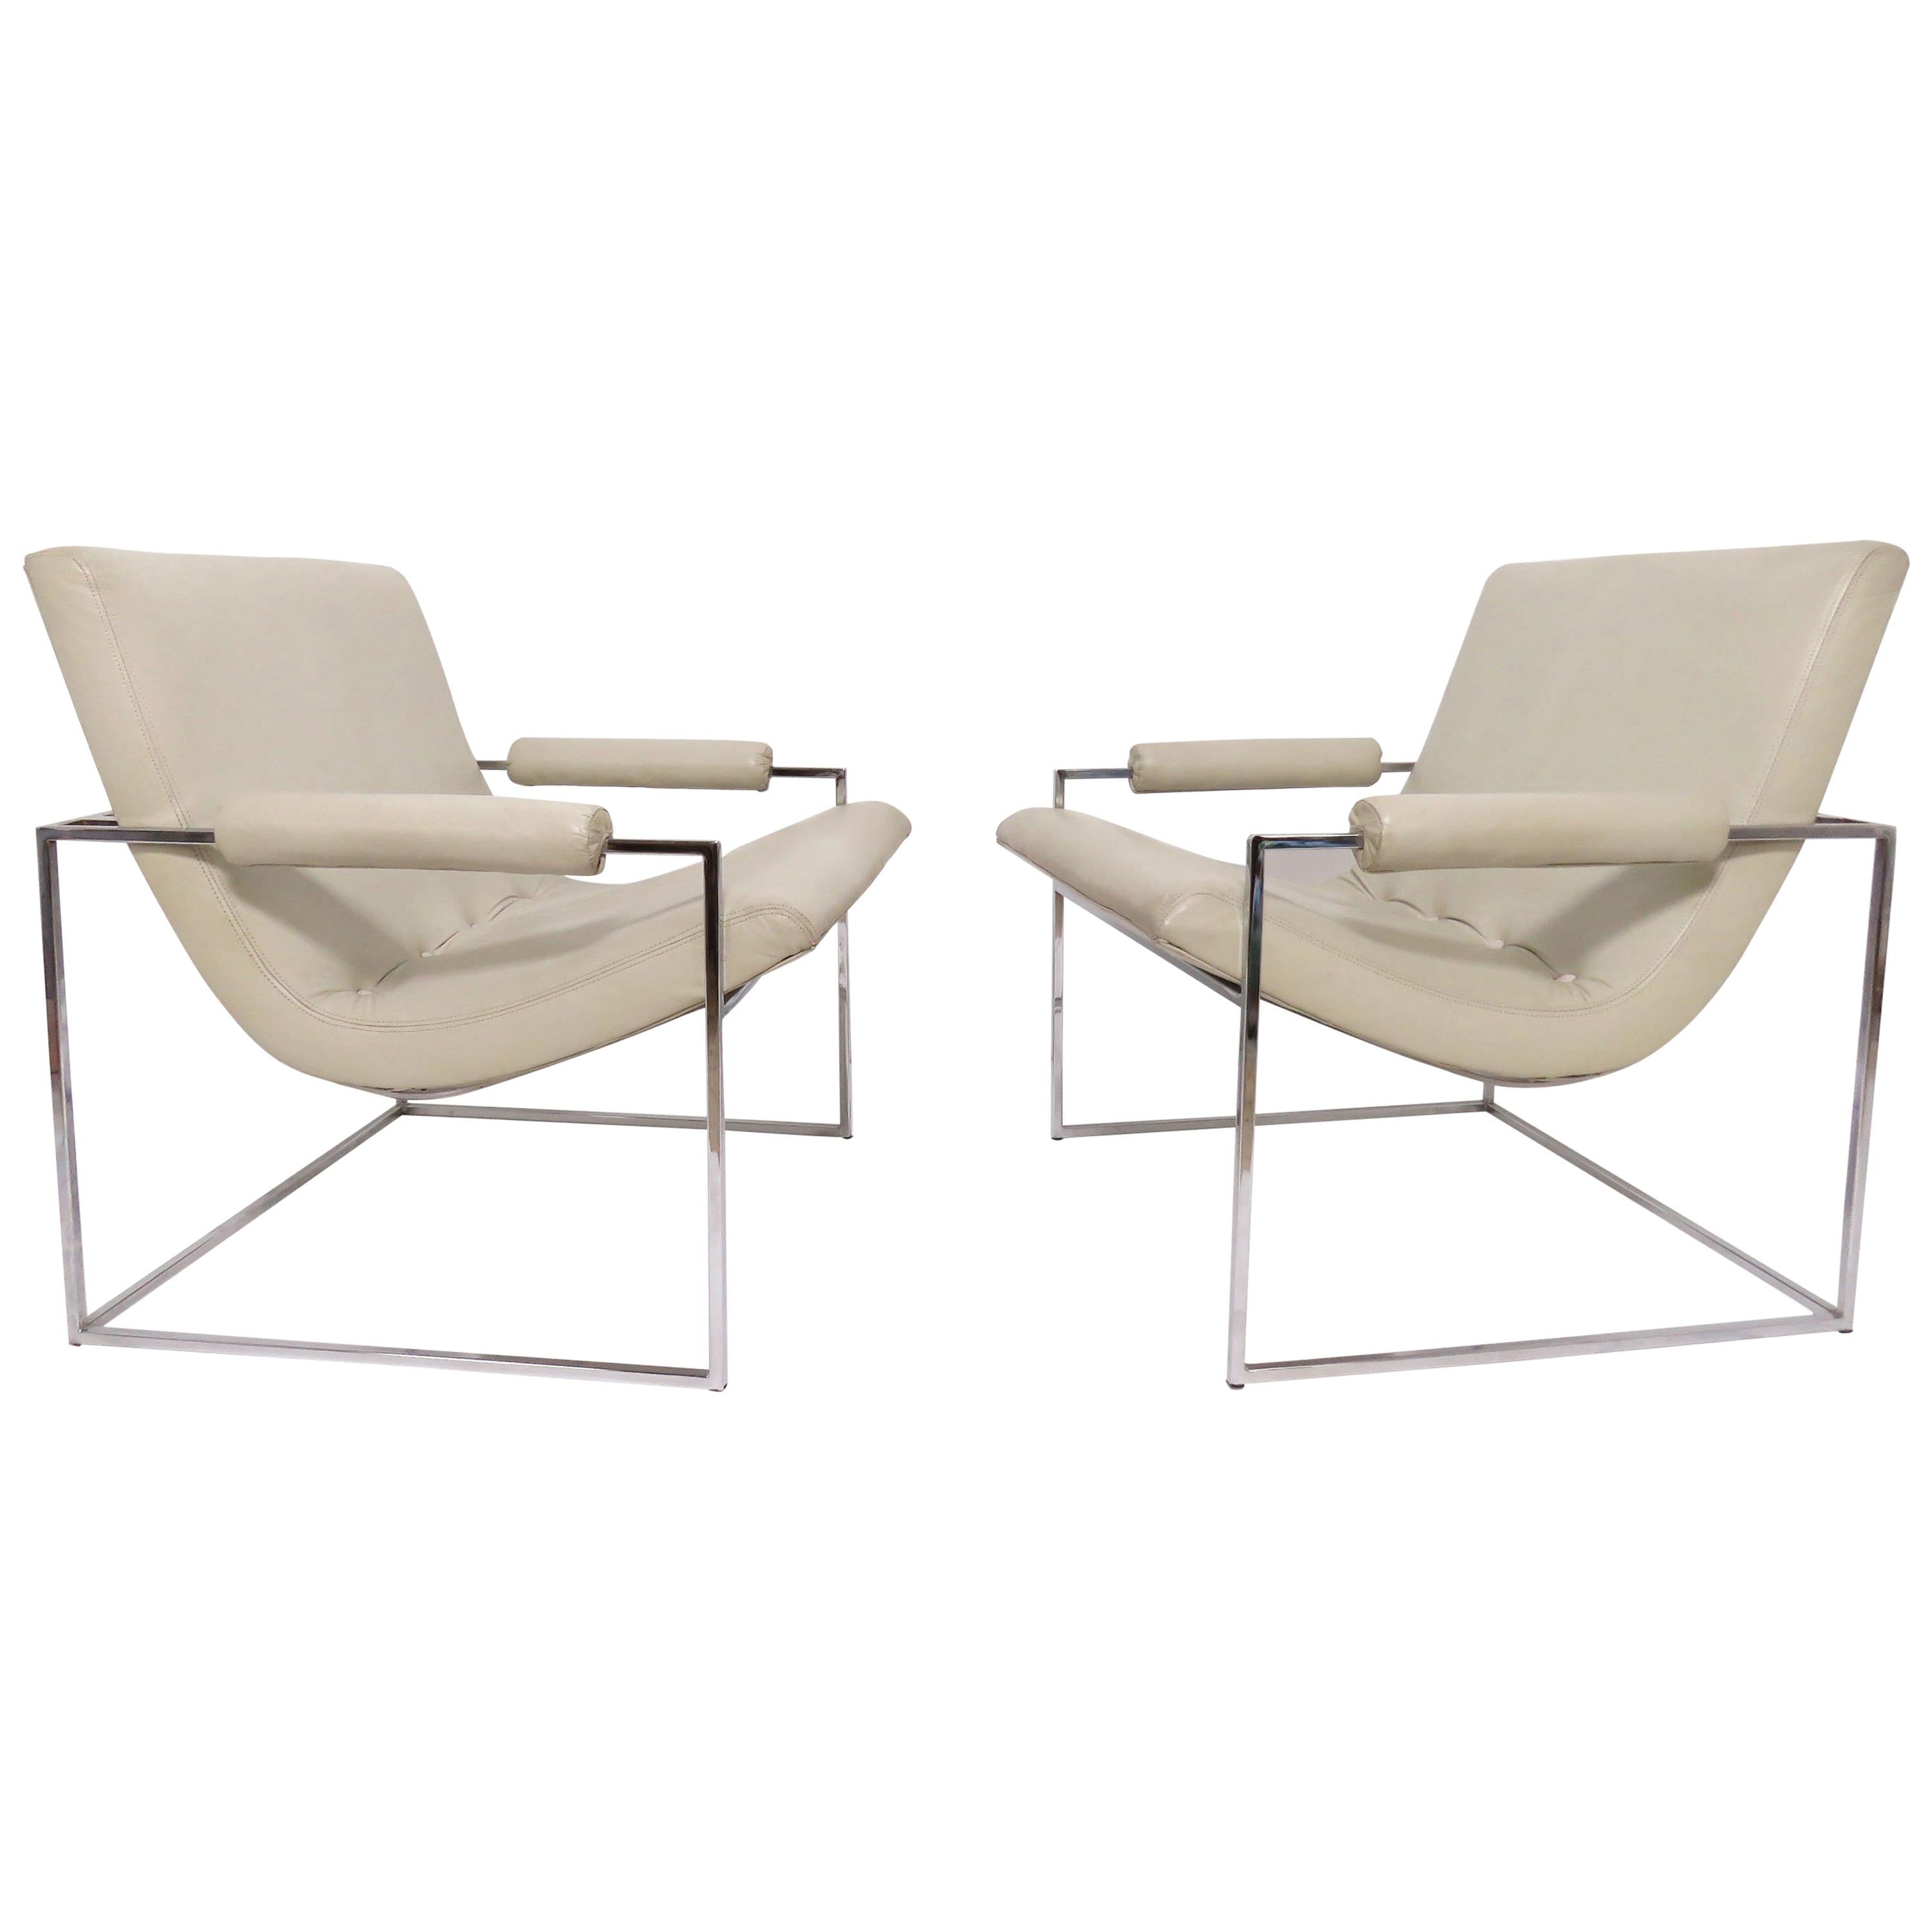 Pair of Leather Milo Baughman Scoop Lounge Chairs for Thayer Coggin